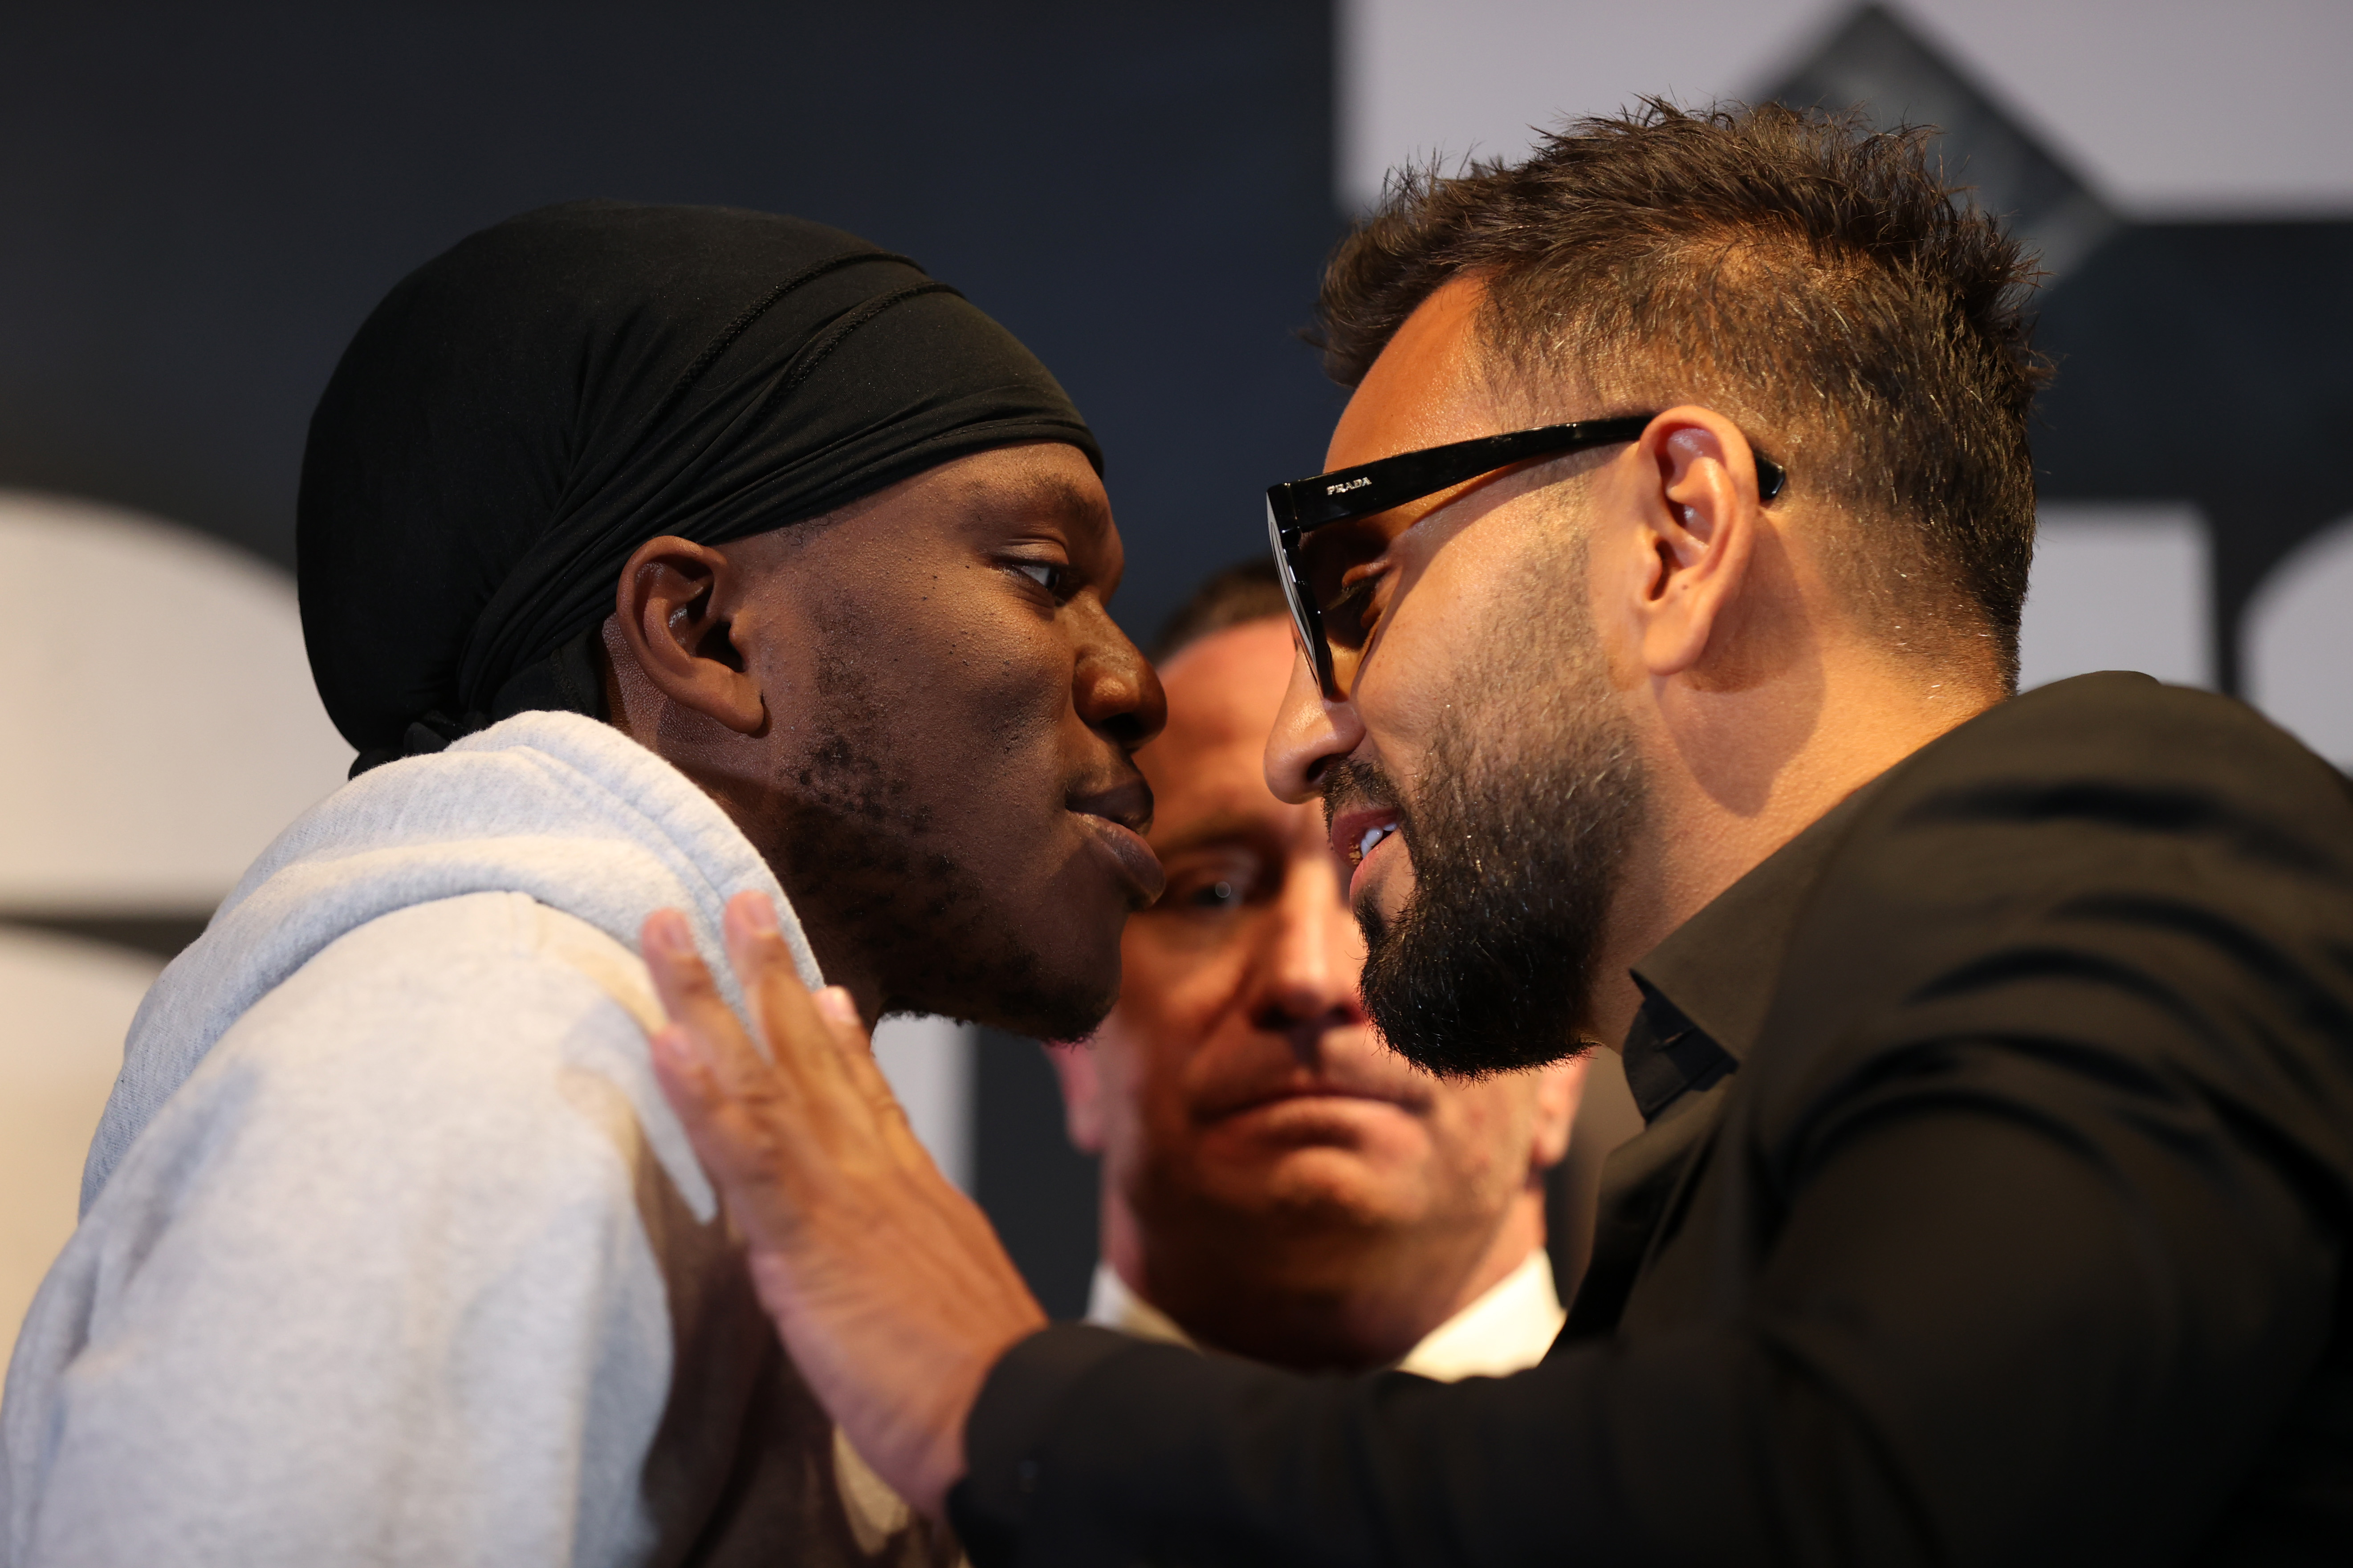 KSI takes on Joe Fournier this Saturday on DAZN PPV, here’s how you can watch and full info on the show